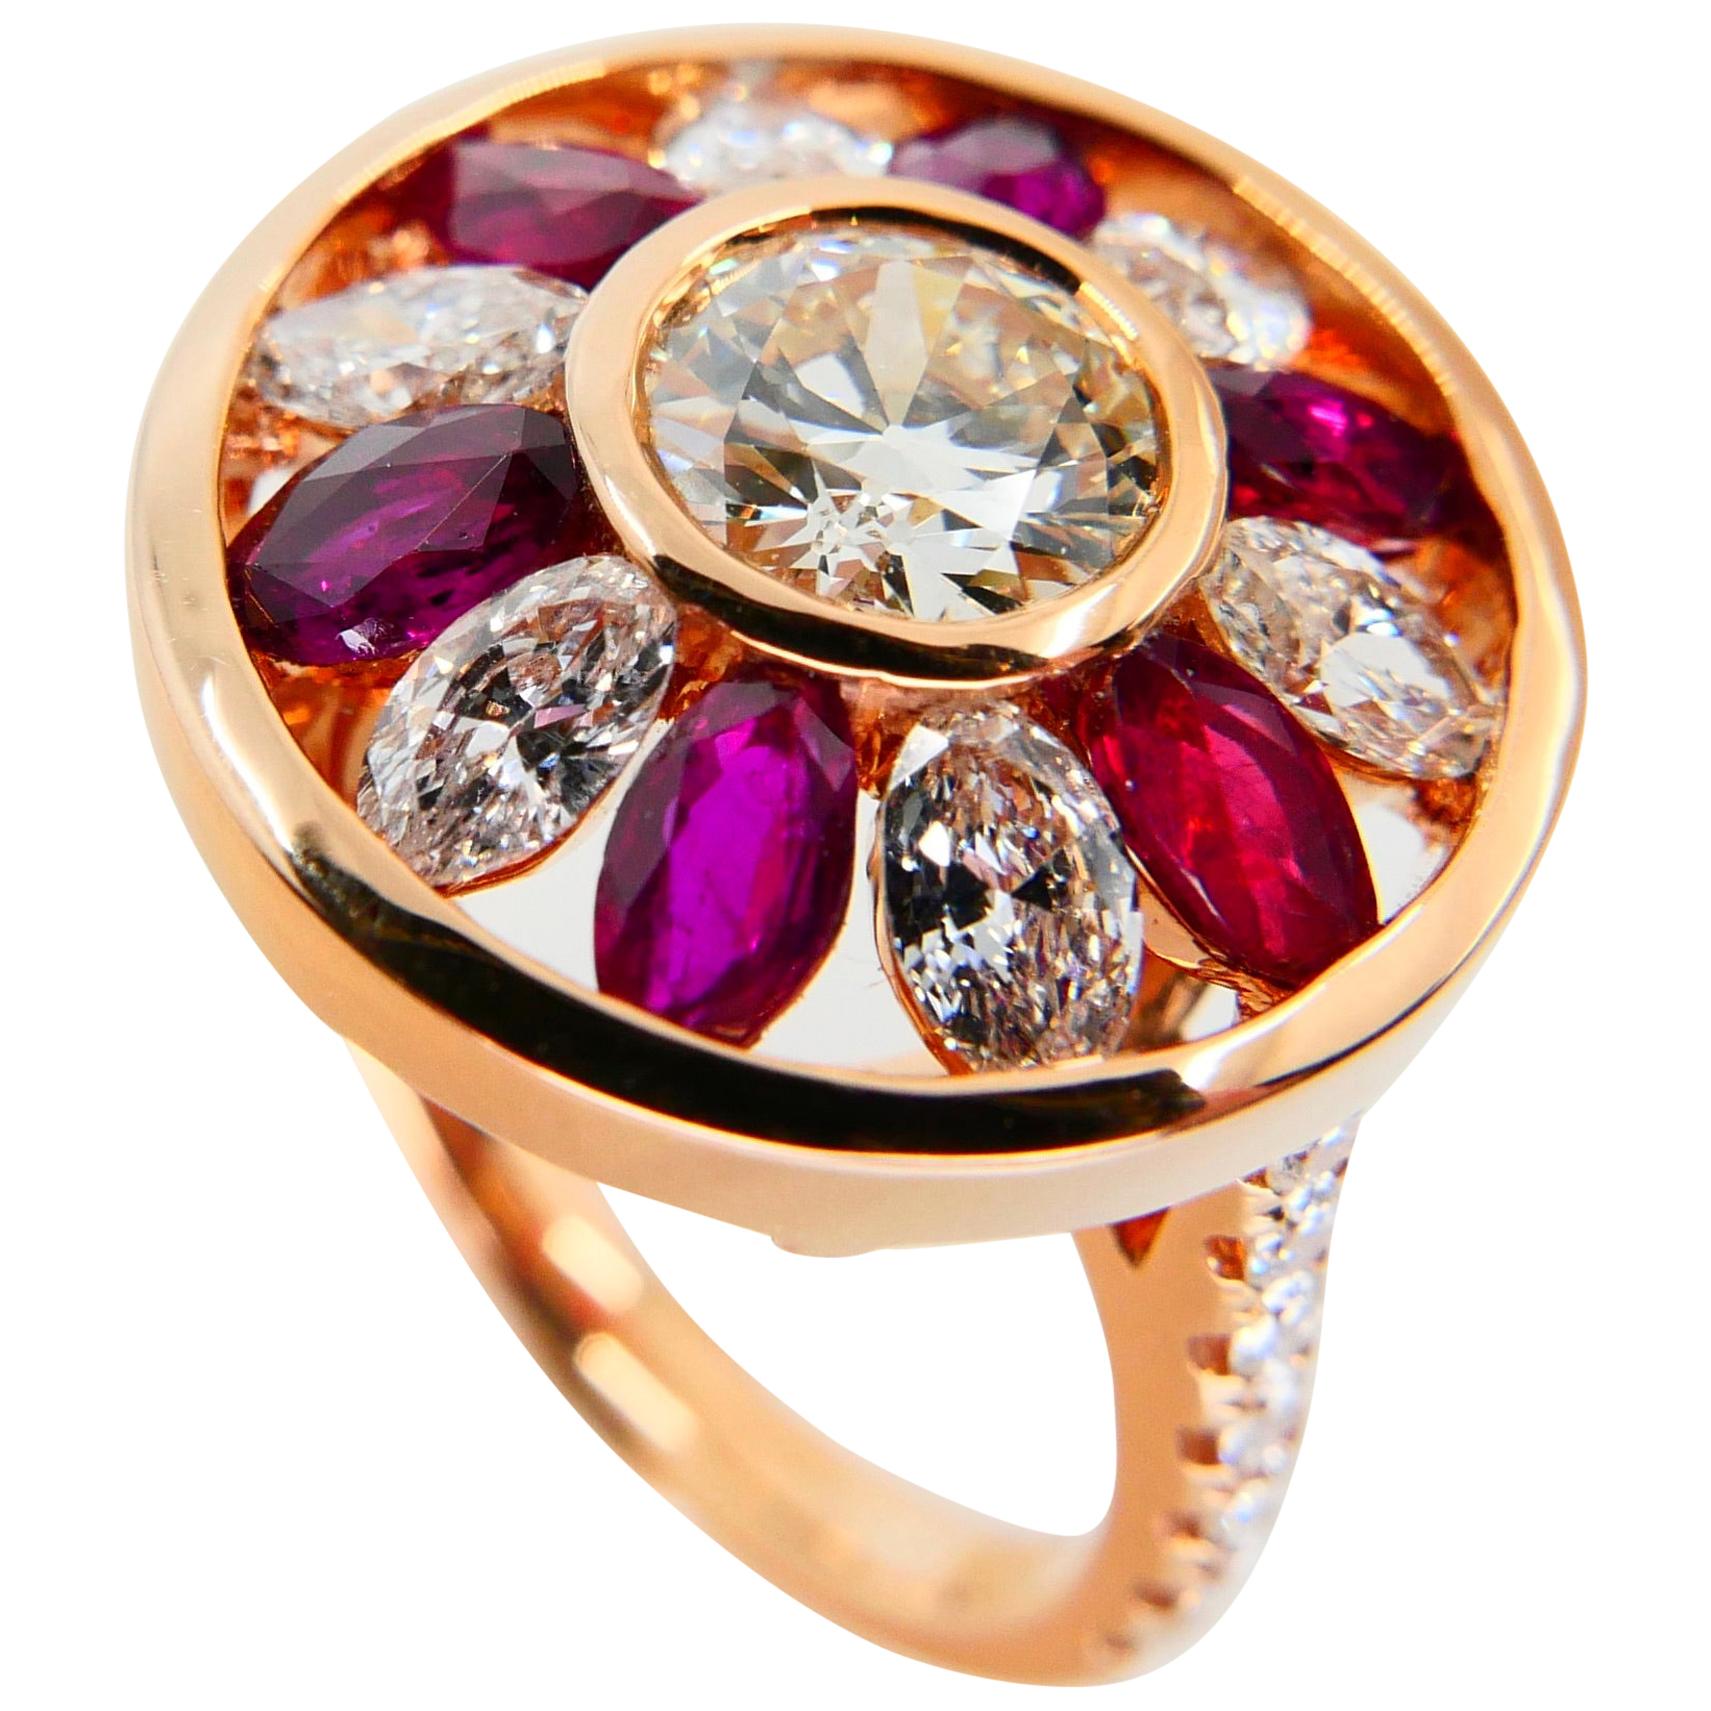 Certified 1.53 Cts Natural Burma Ruby & Old Cut Diamond Ring, 18K Rose Gold